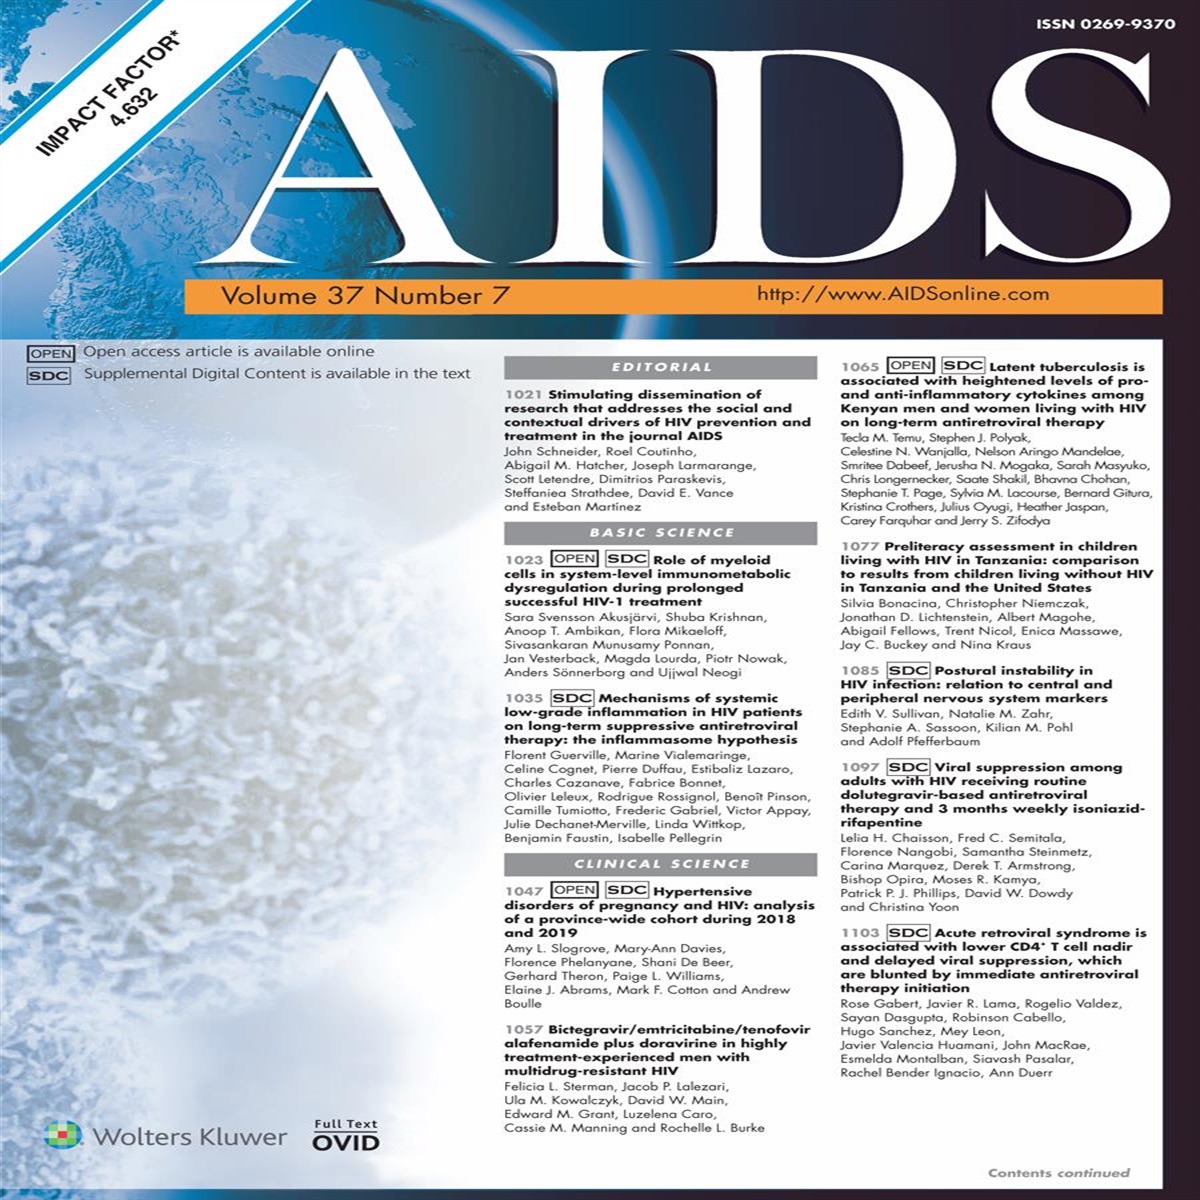 An army marches on its stomach: immunometabolic dysregulation in persons with HIV